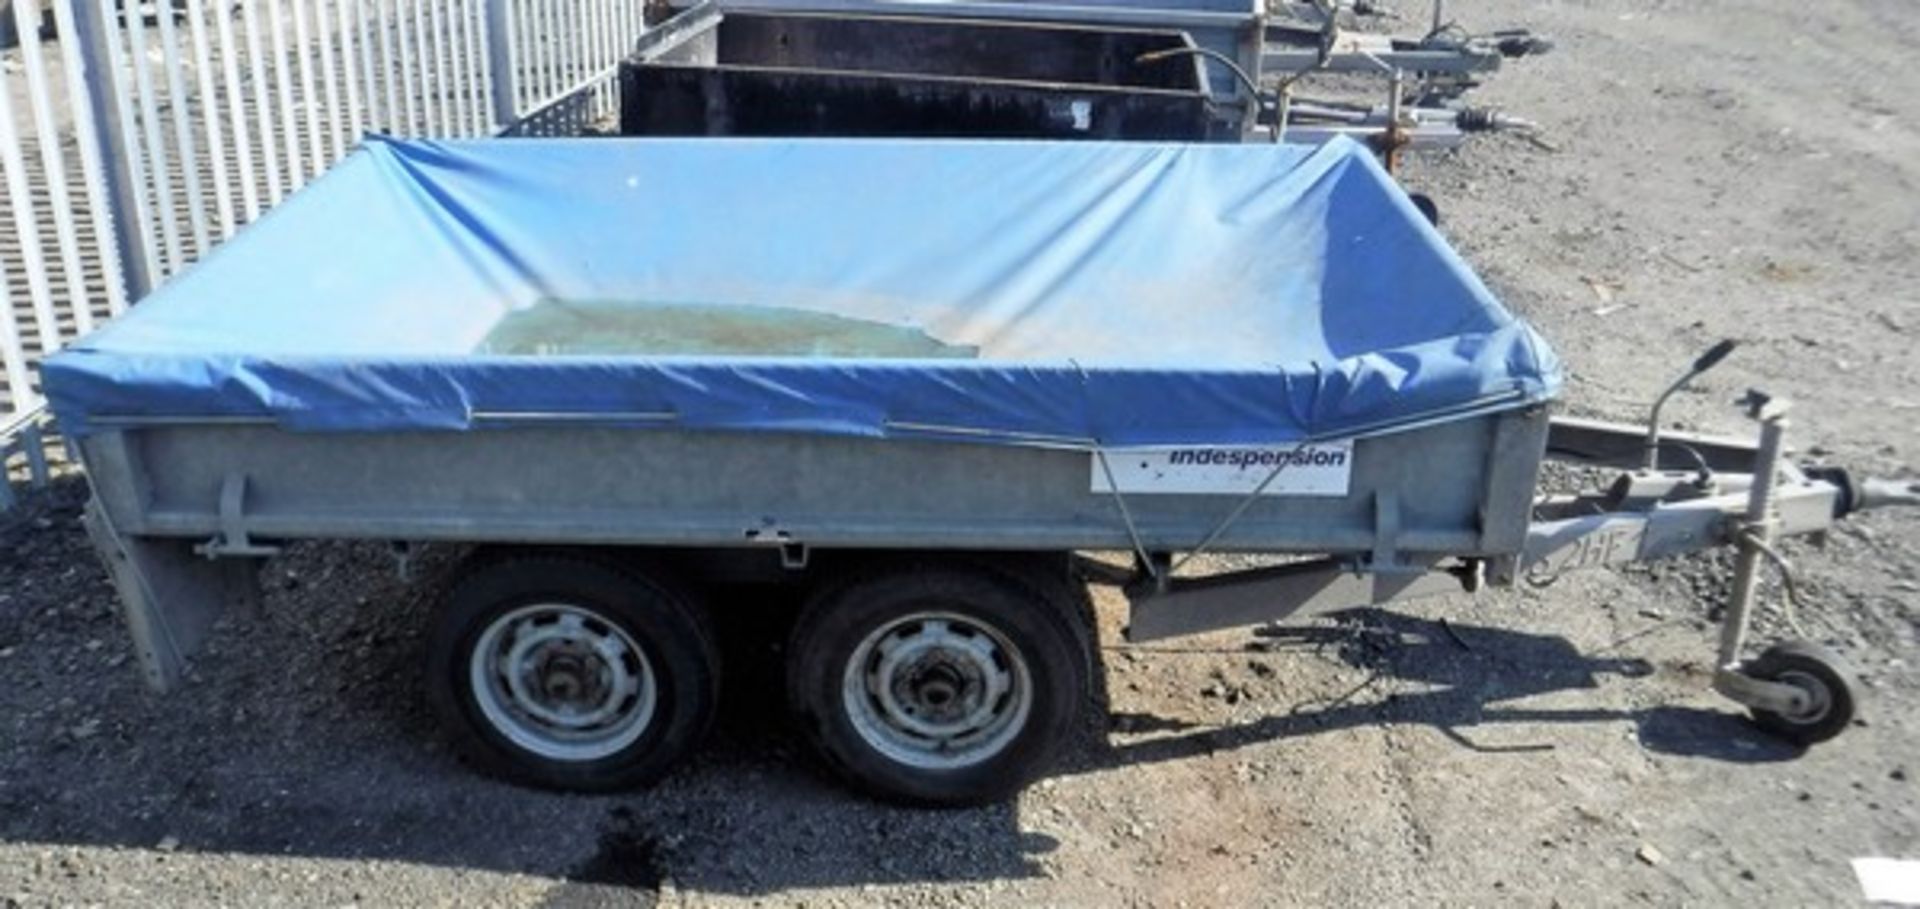 INDESPENSION trailer. S/N 070086. Twin axle 8ft x 5ft, drop tailgate with cover. Asset no 758-4029.